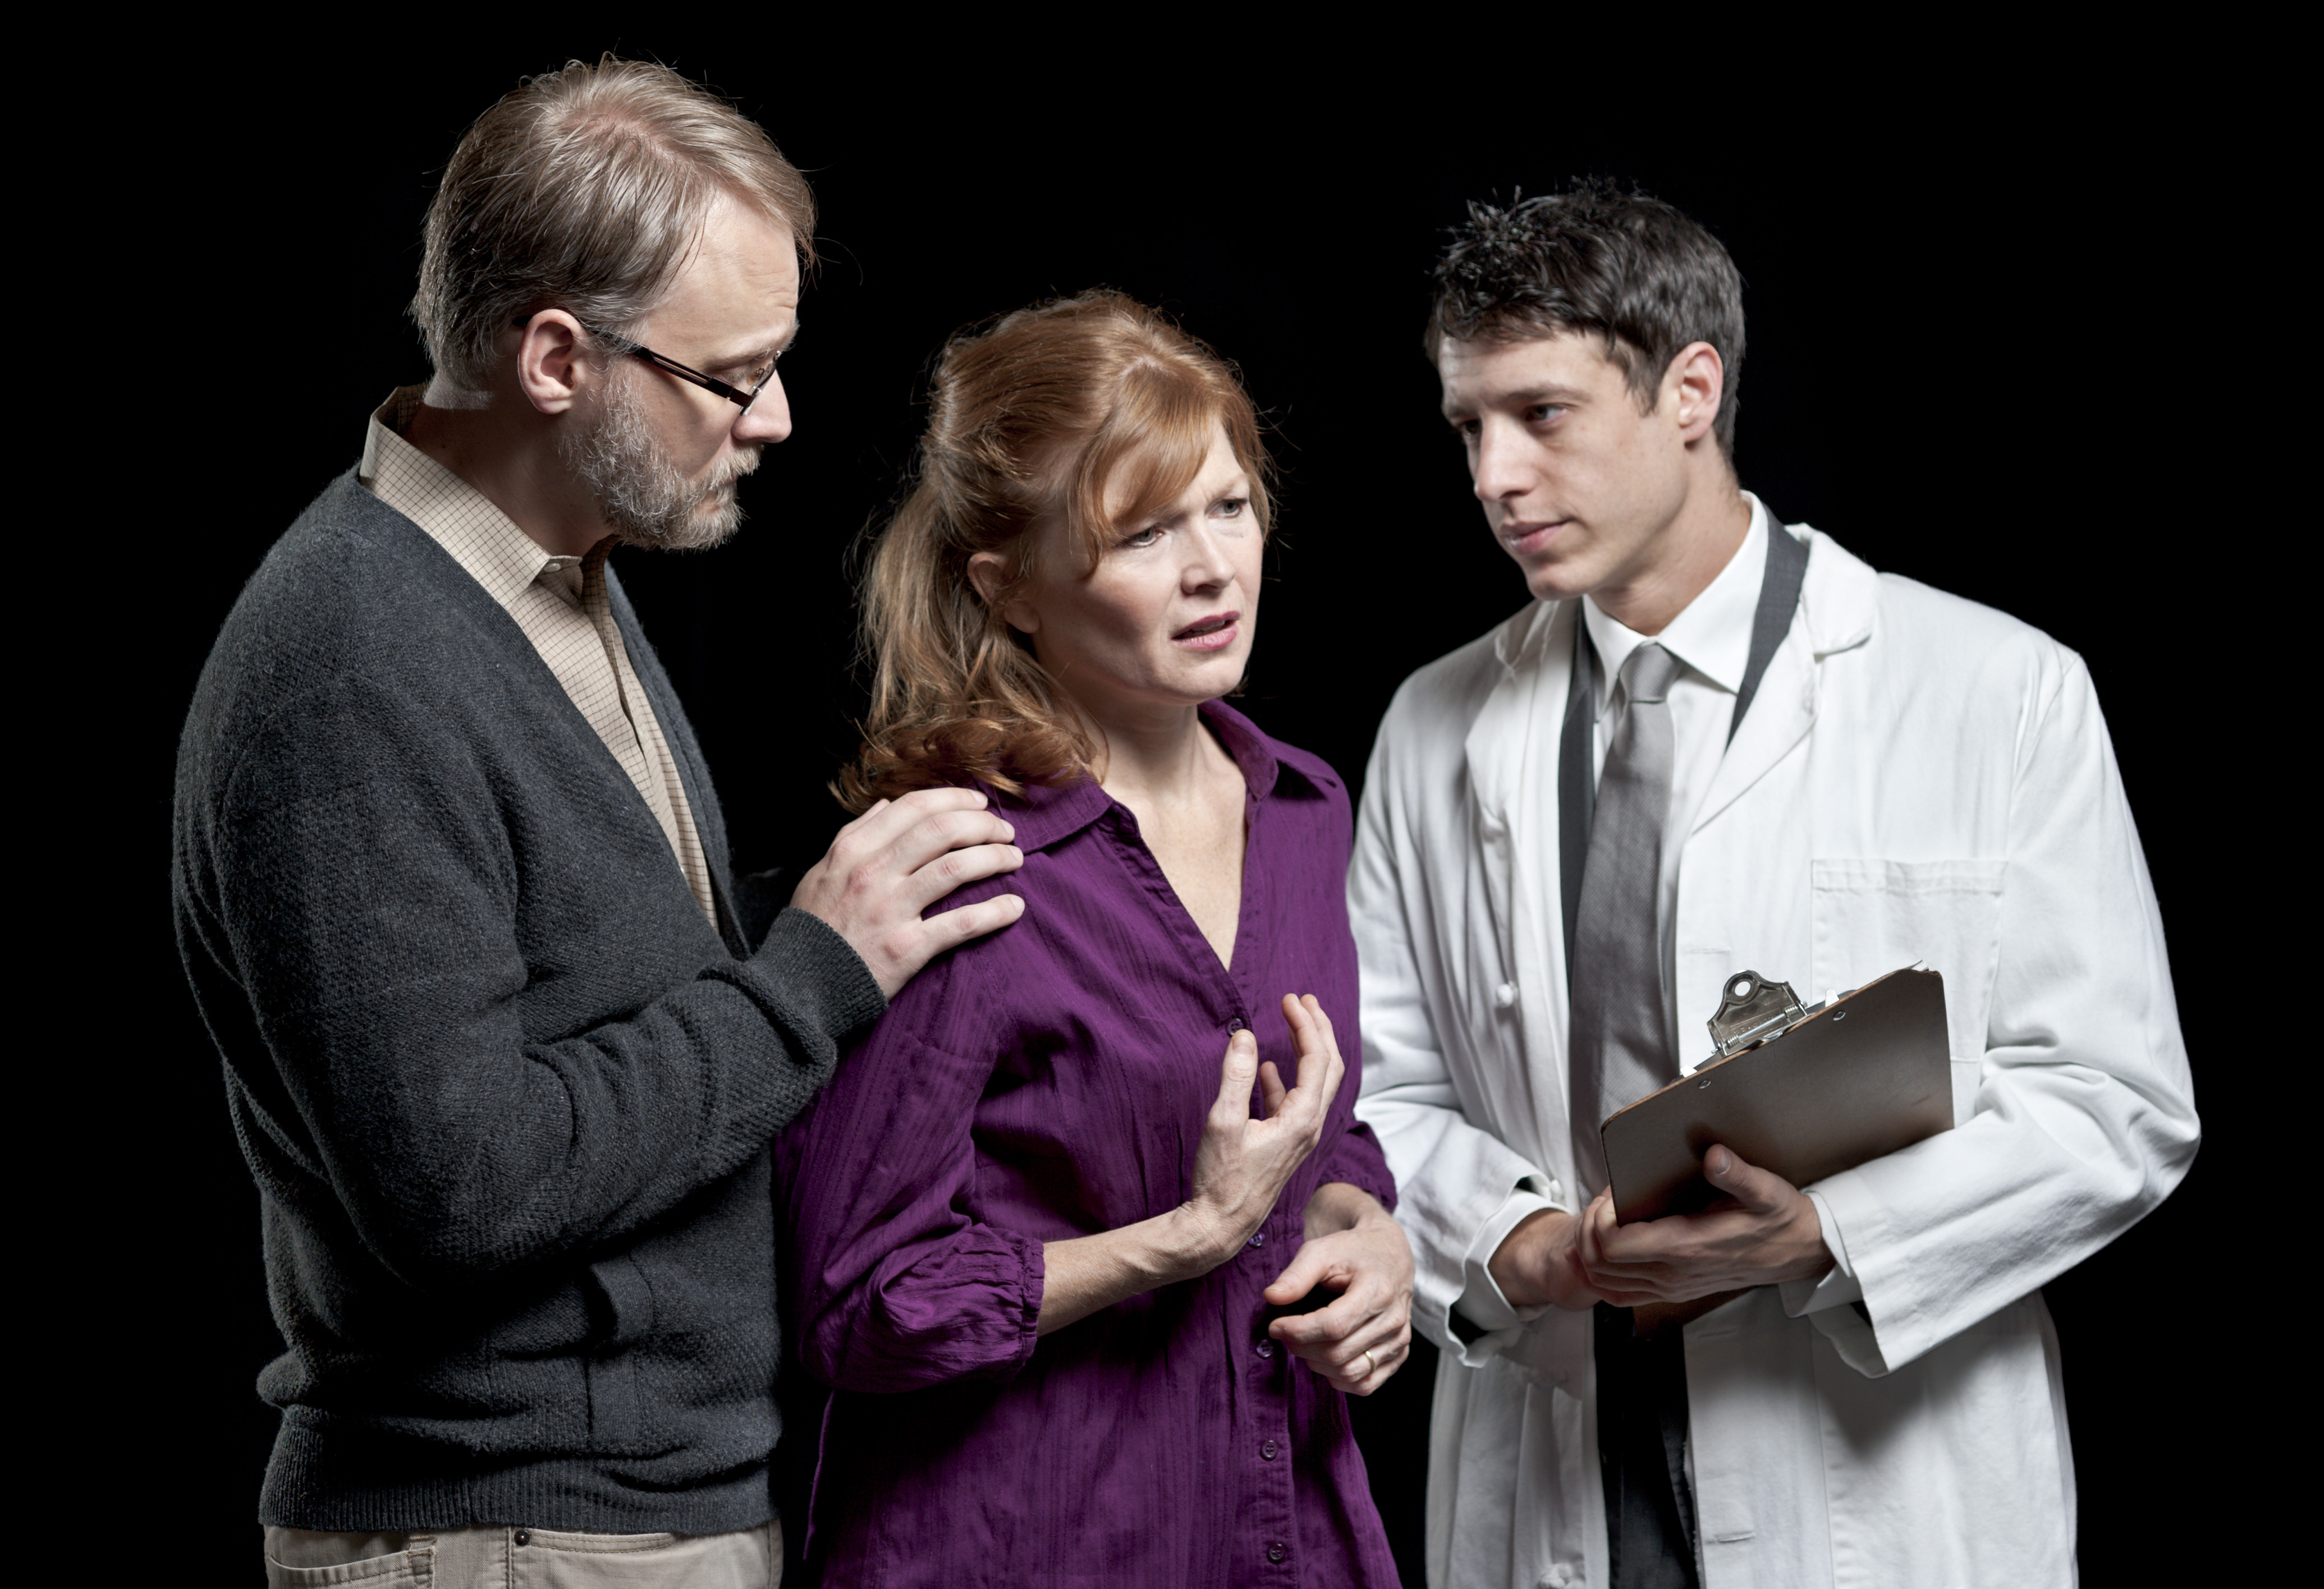 Diana (Catherine Ogden), her husband Dan (Ross Wheeler Left), and Dr. Fine (Jonathan Coarsey, right) stand together on stage